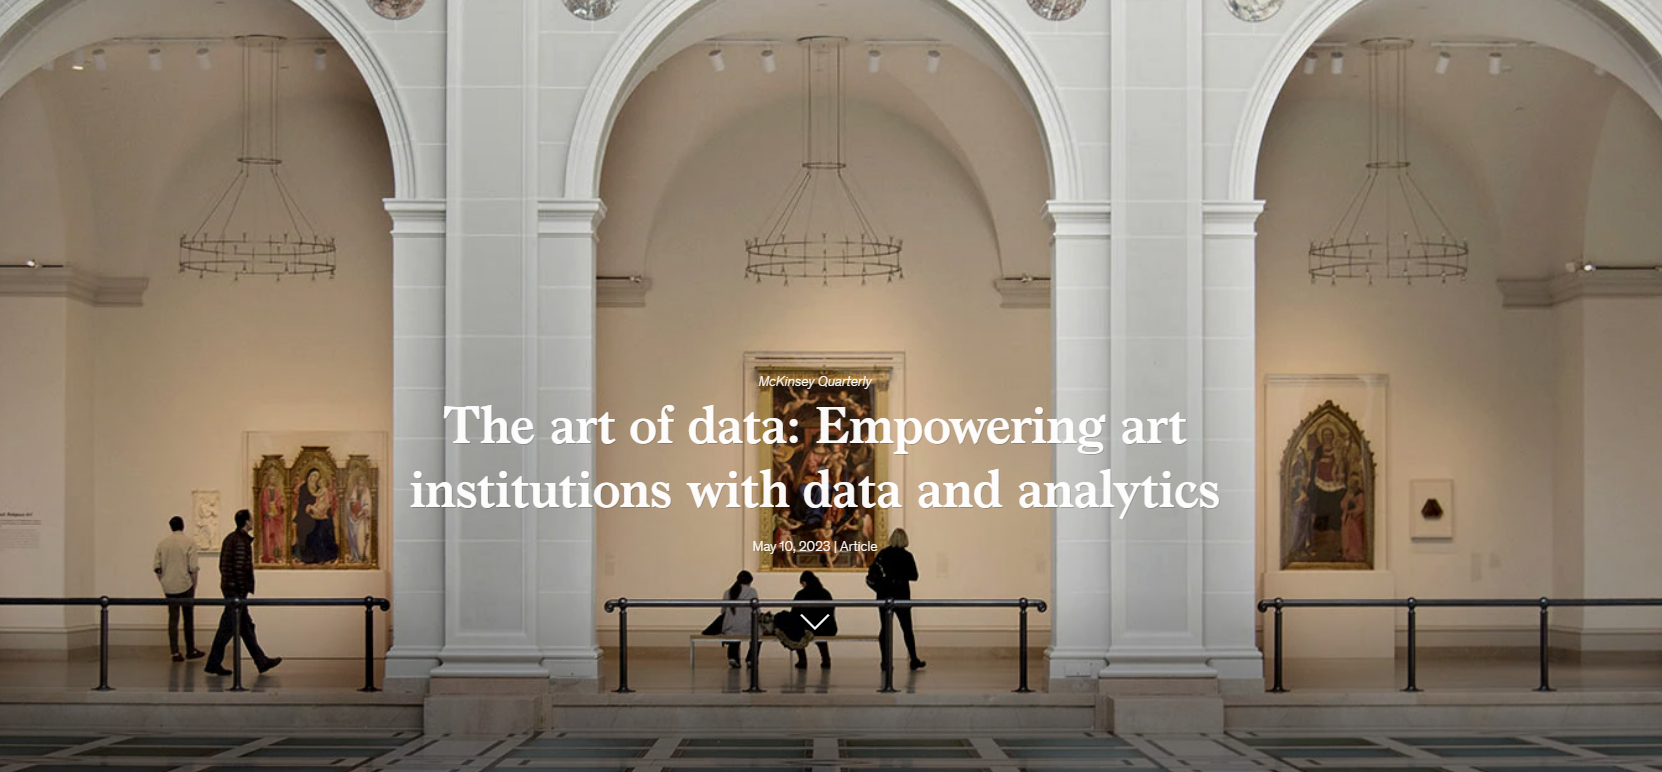 The art of data: Empowering art institutions with data and analytics